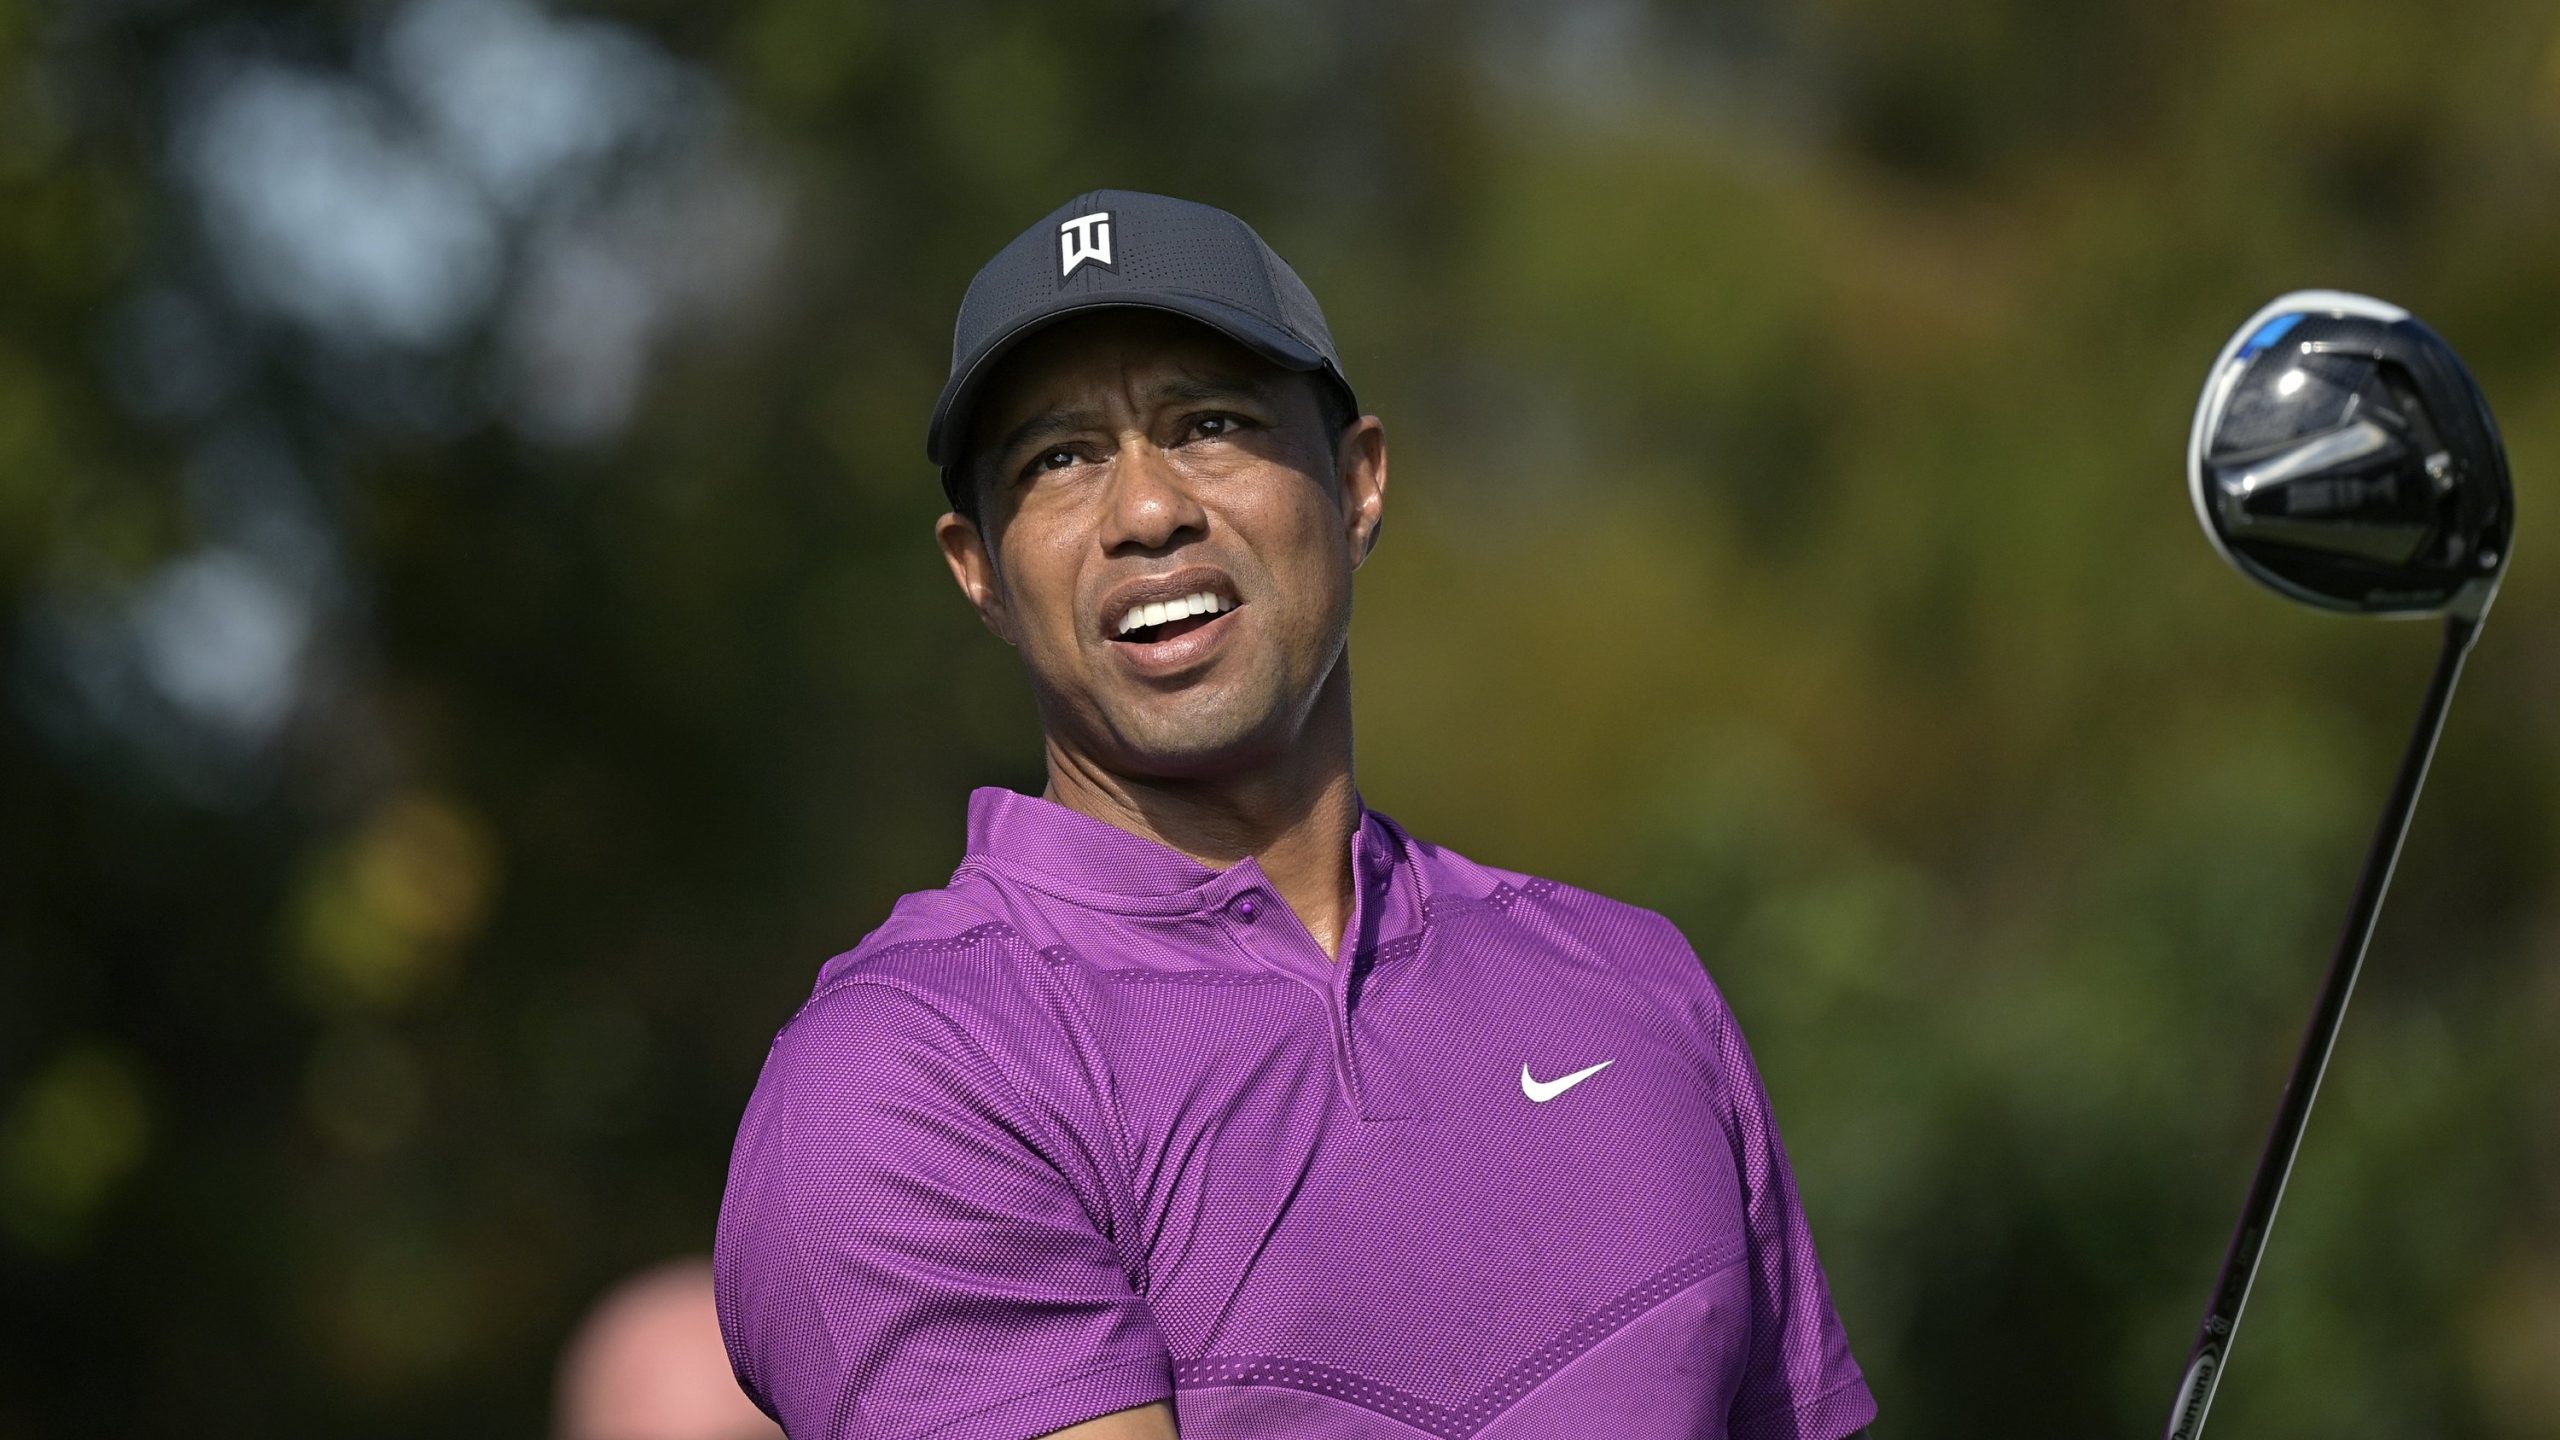 Woods has a fifth back surgery, to miss Torrie Pines and Rivera